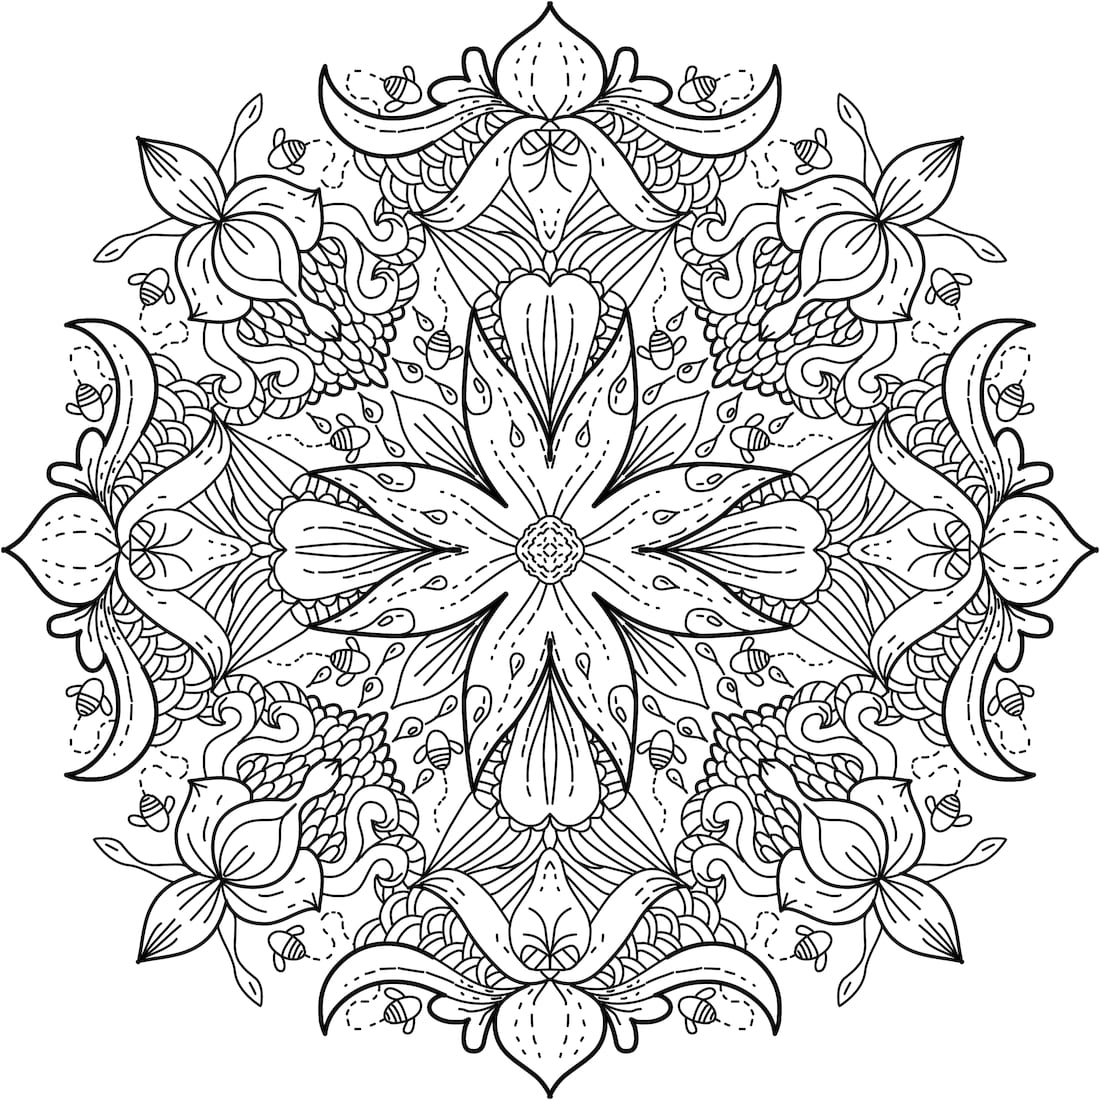 Wildflower Meadow Coloring Page